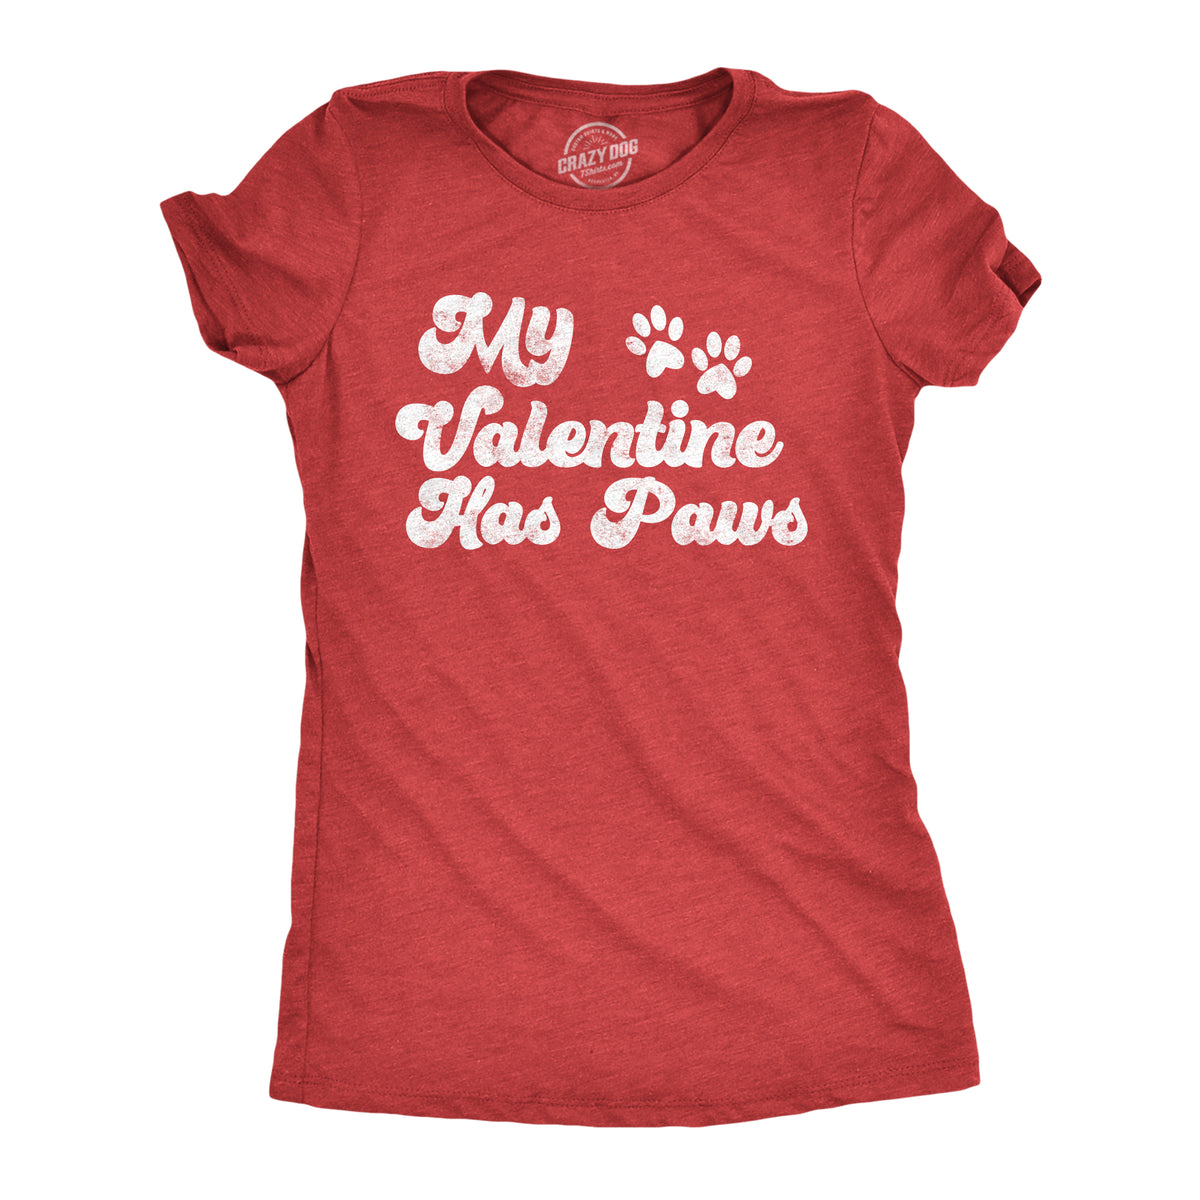 Funny Heather Red - PAWS My Favorite Valentine Has Paws Womens T Shirt Nerdy Valentine&#39;s Day Tee